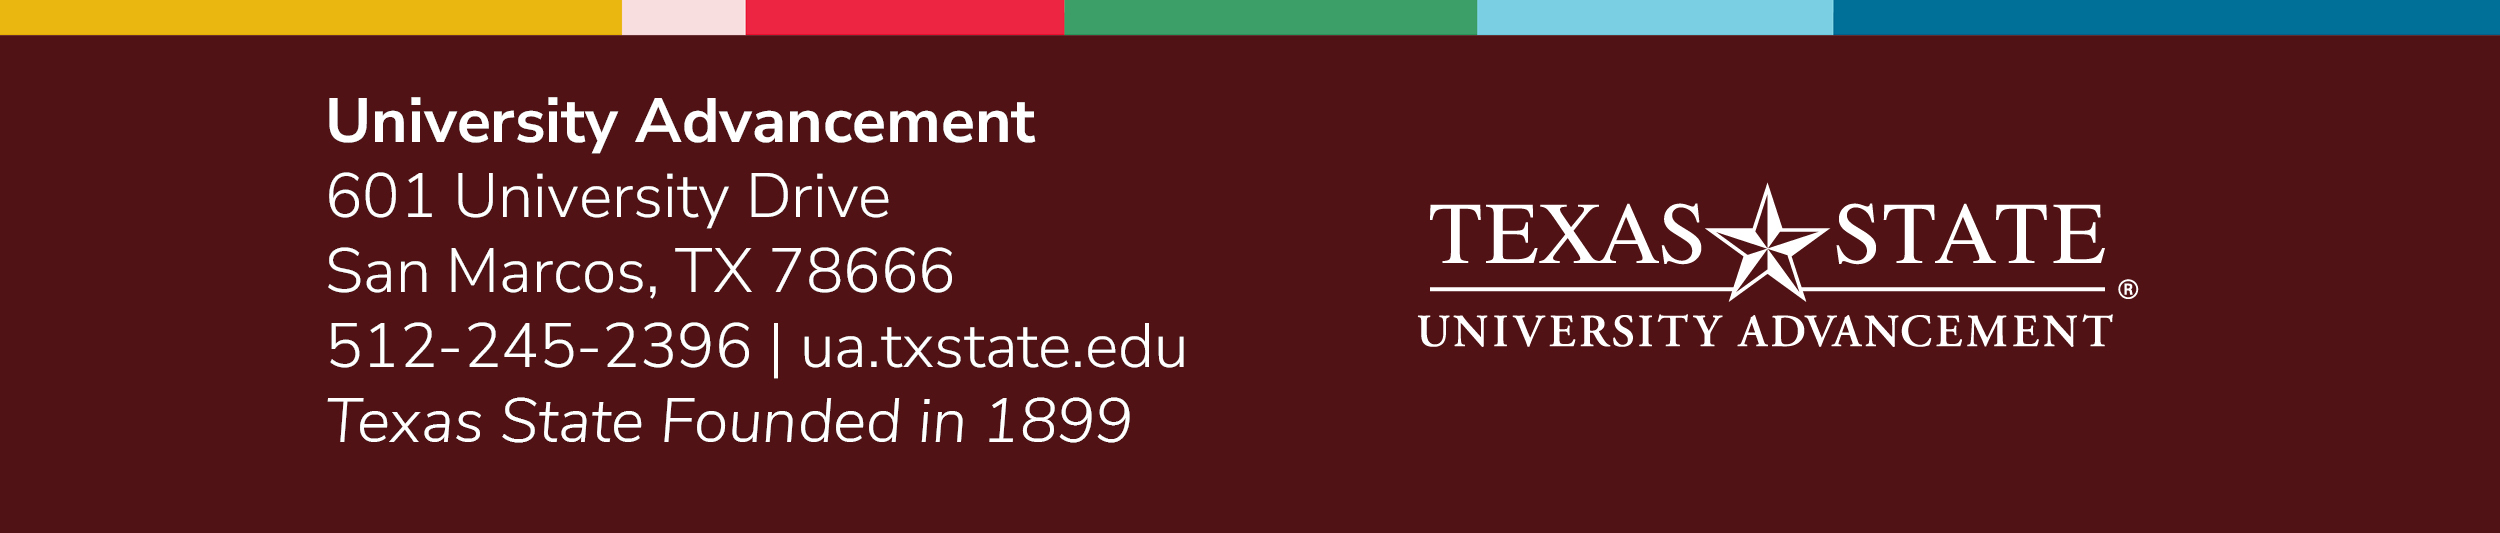 Universitsy Advancement, 601 University Drive, San Marcos, TX 78666, 512-245-2396, ua.txstate.edu, Texas State Founded in 1899, logo of Texas State University Advancement